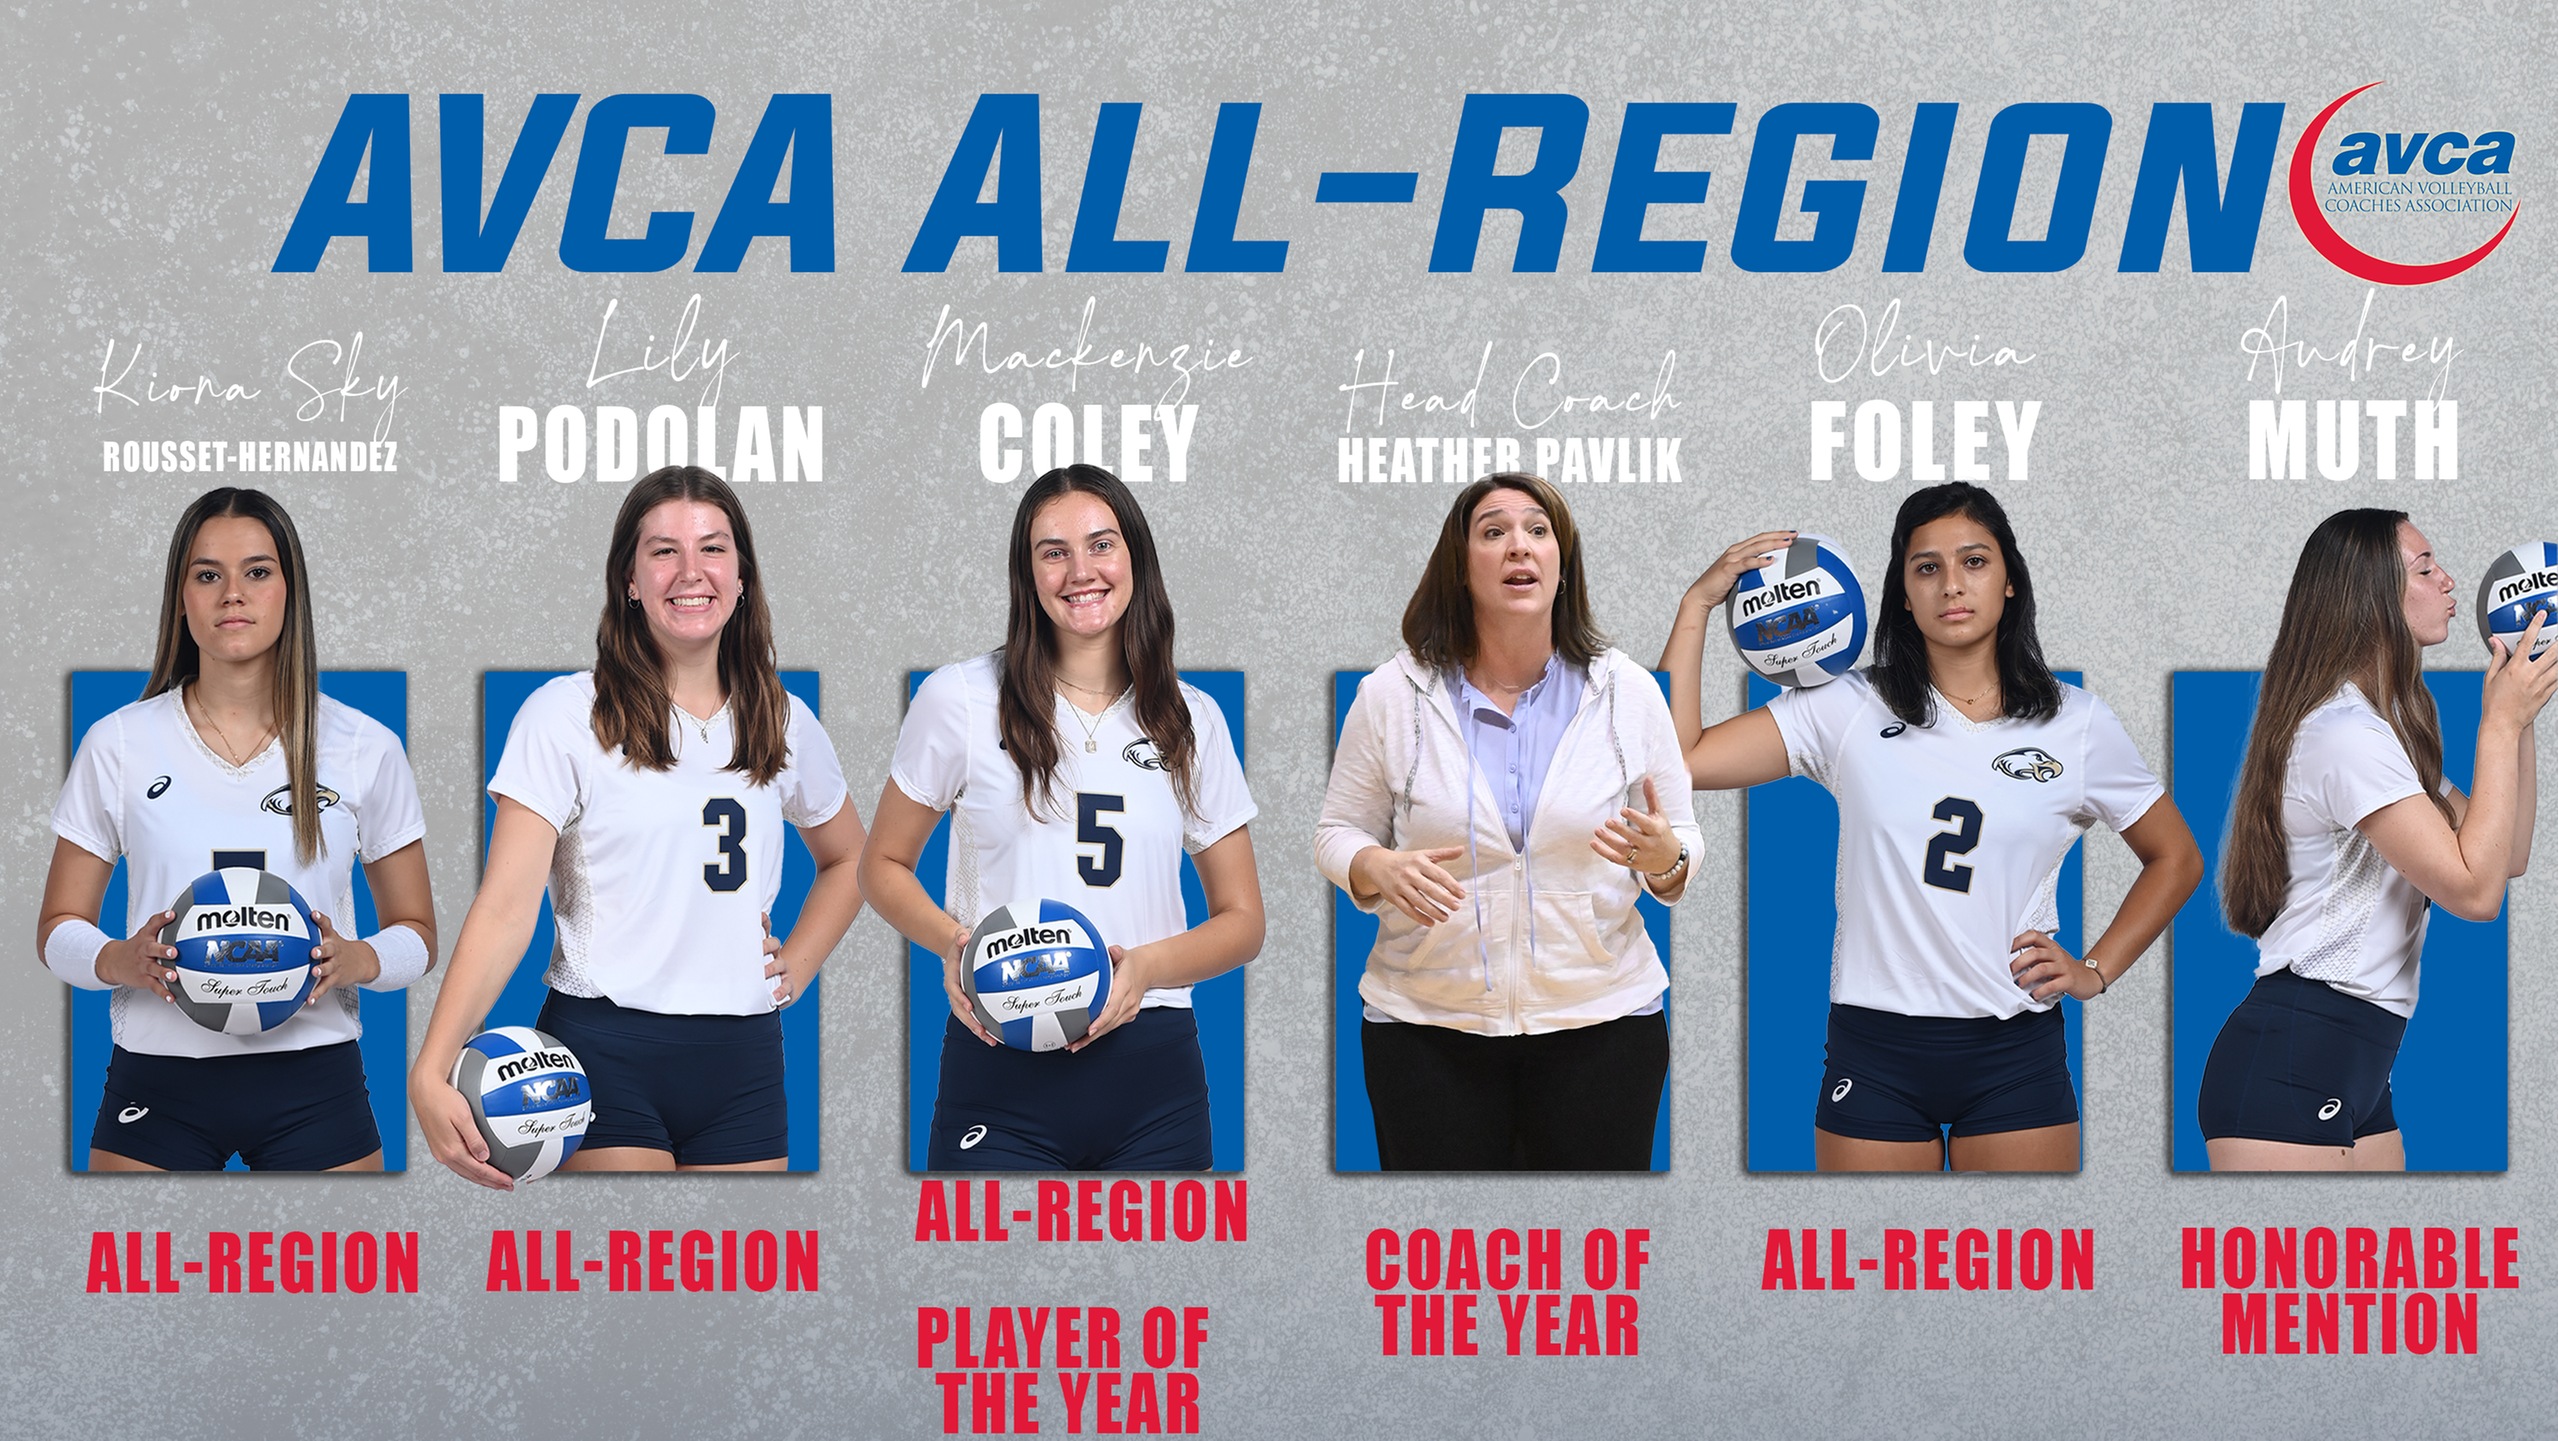 Coley Named AVCA Regional Player of the Year, Pavlik Tabbed Regional Coach of the Year as Women's Volleyball Places Five on All-Region Team